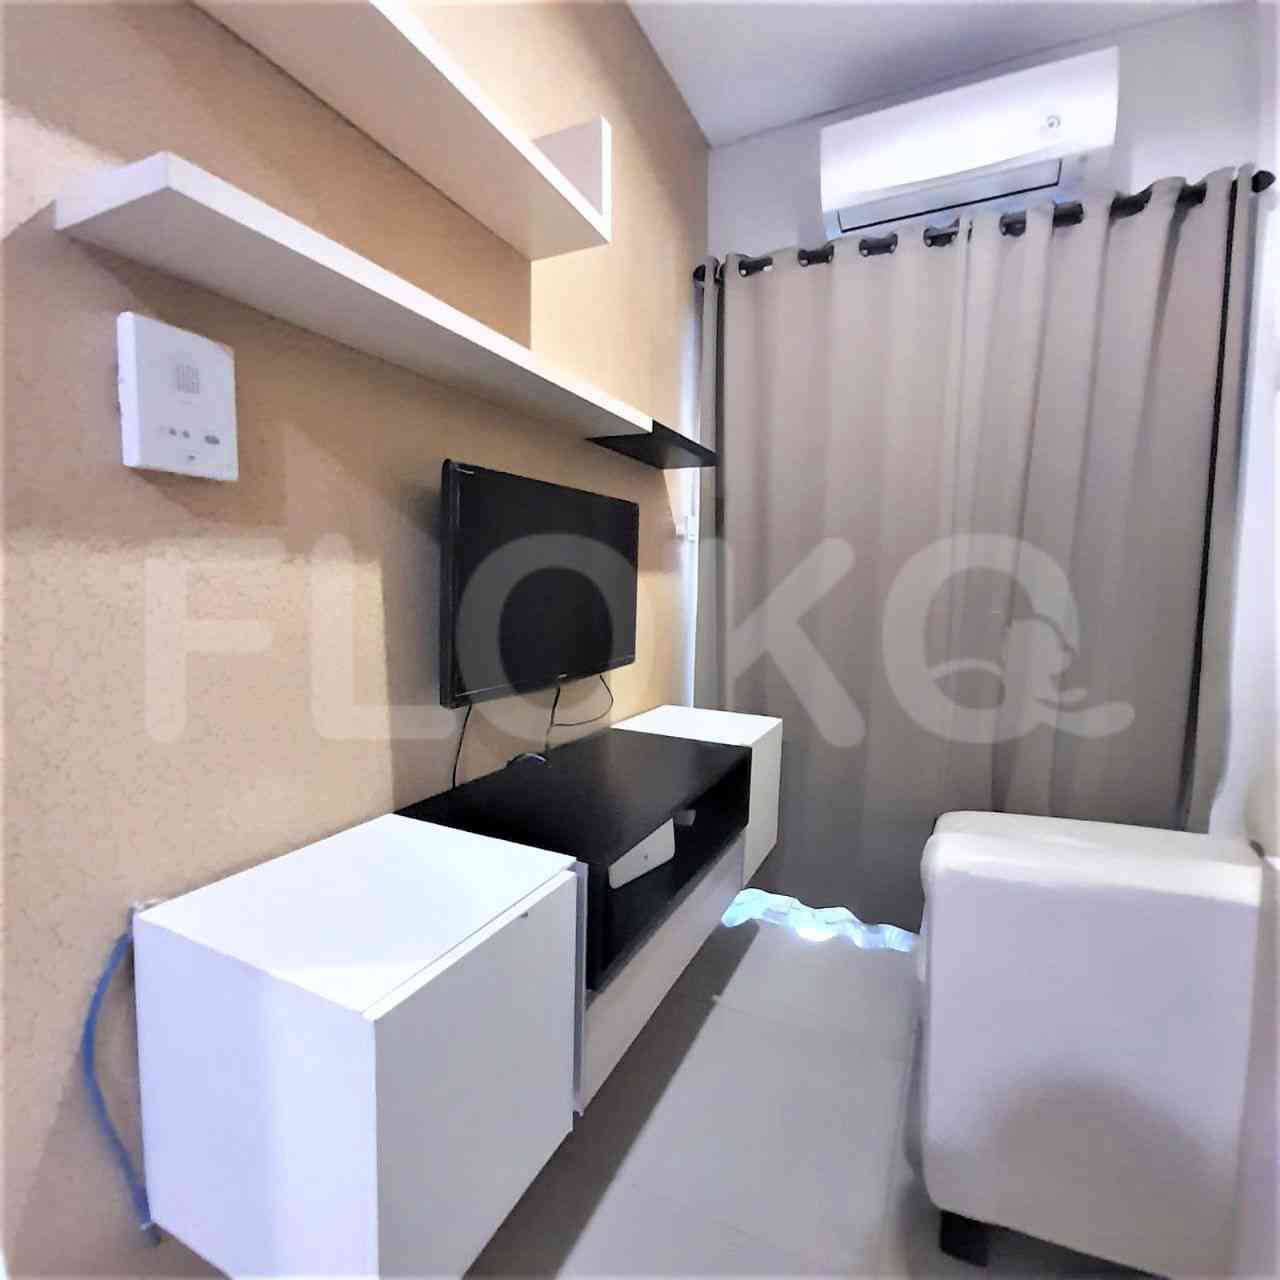 2 Bedroom on 27th Floor for Rent in GP Plaza Apartment - ftadcc 1